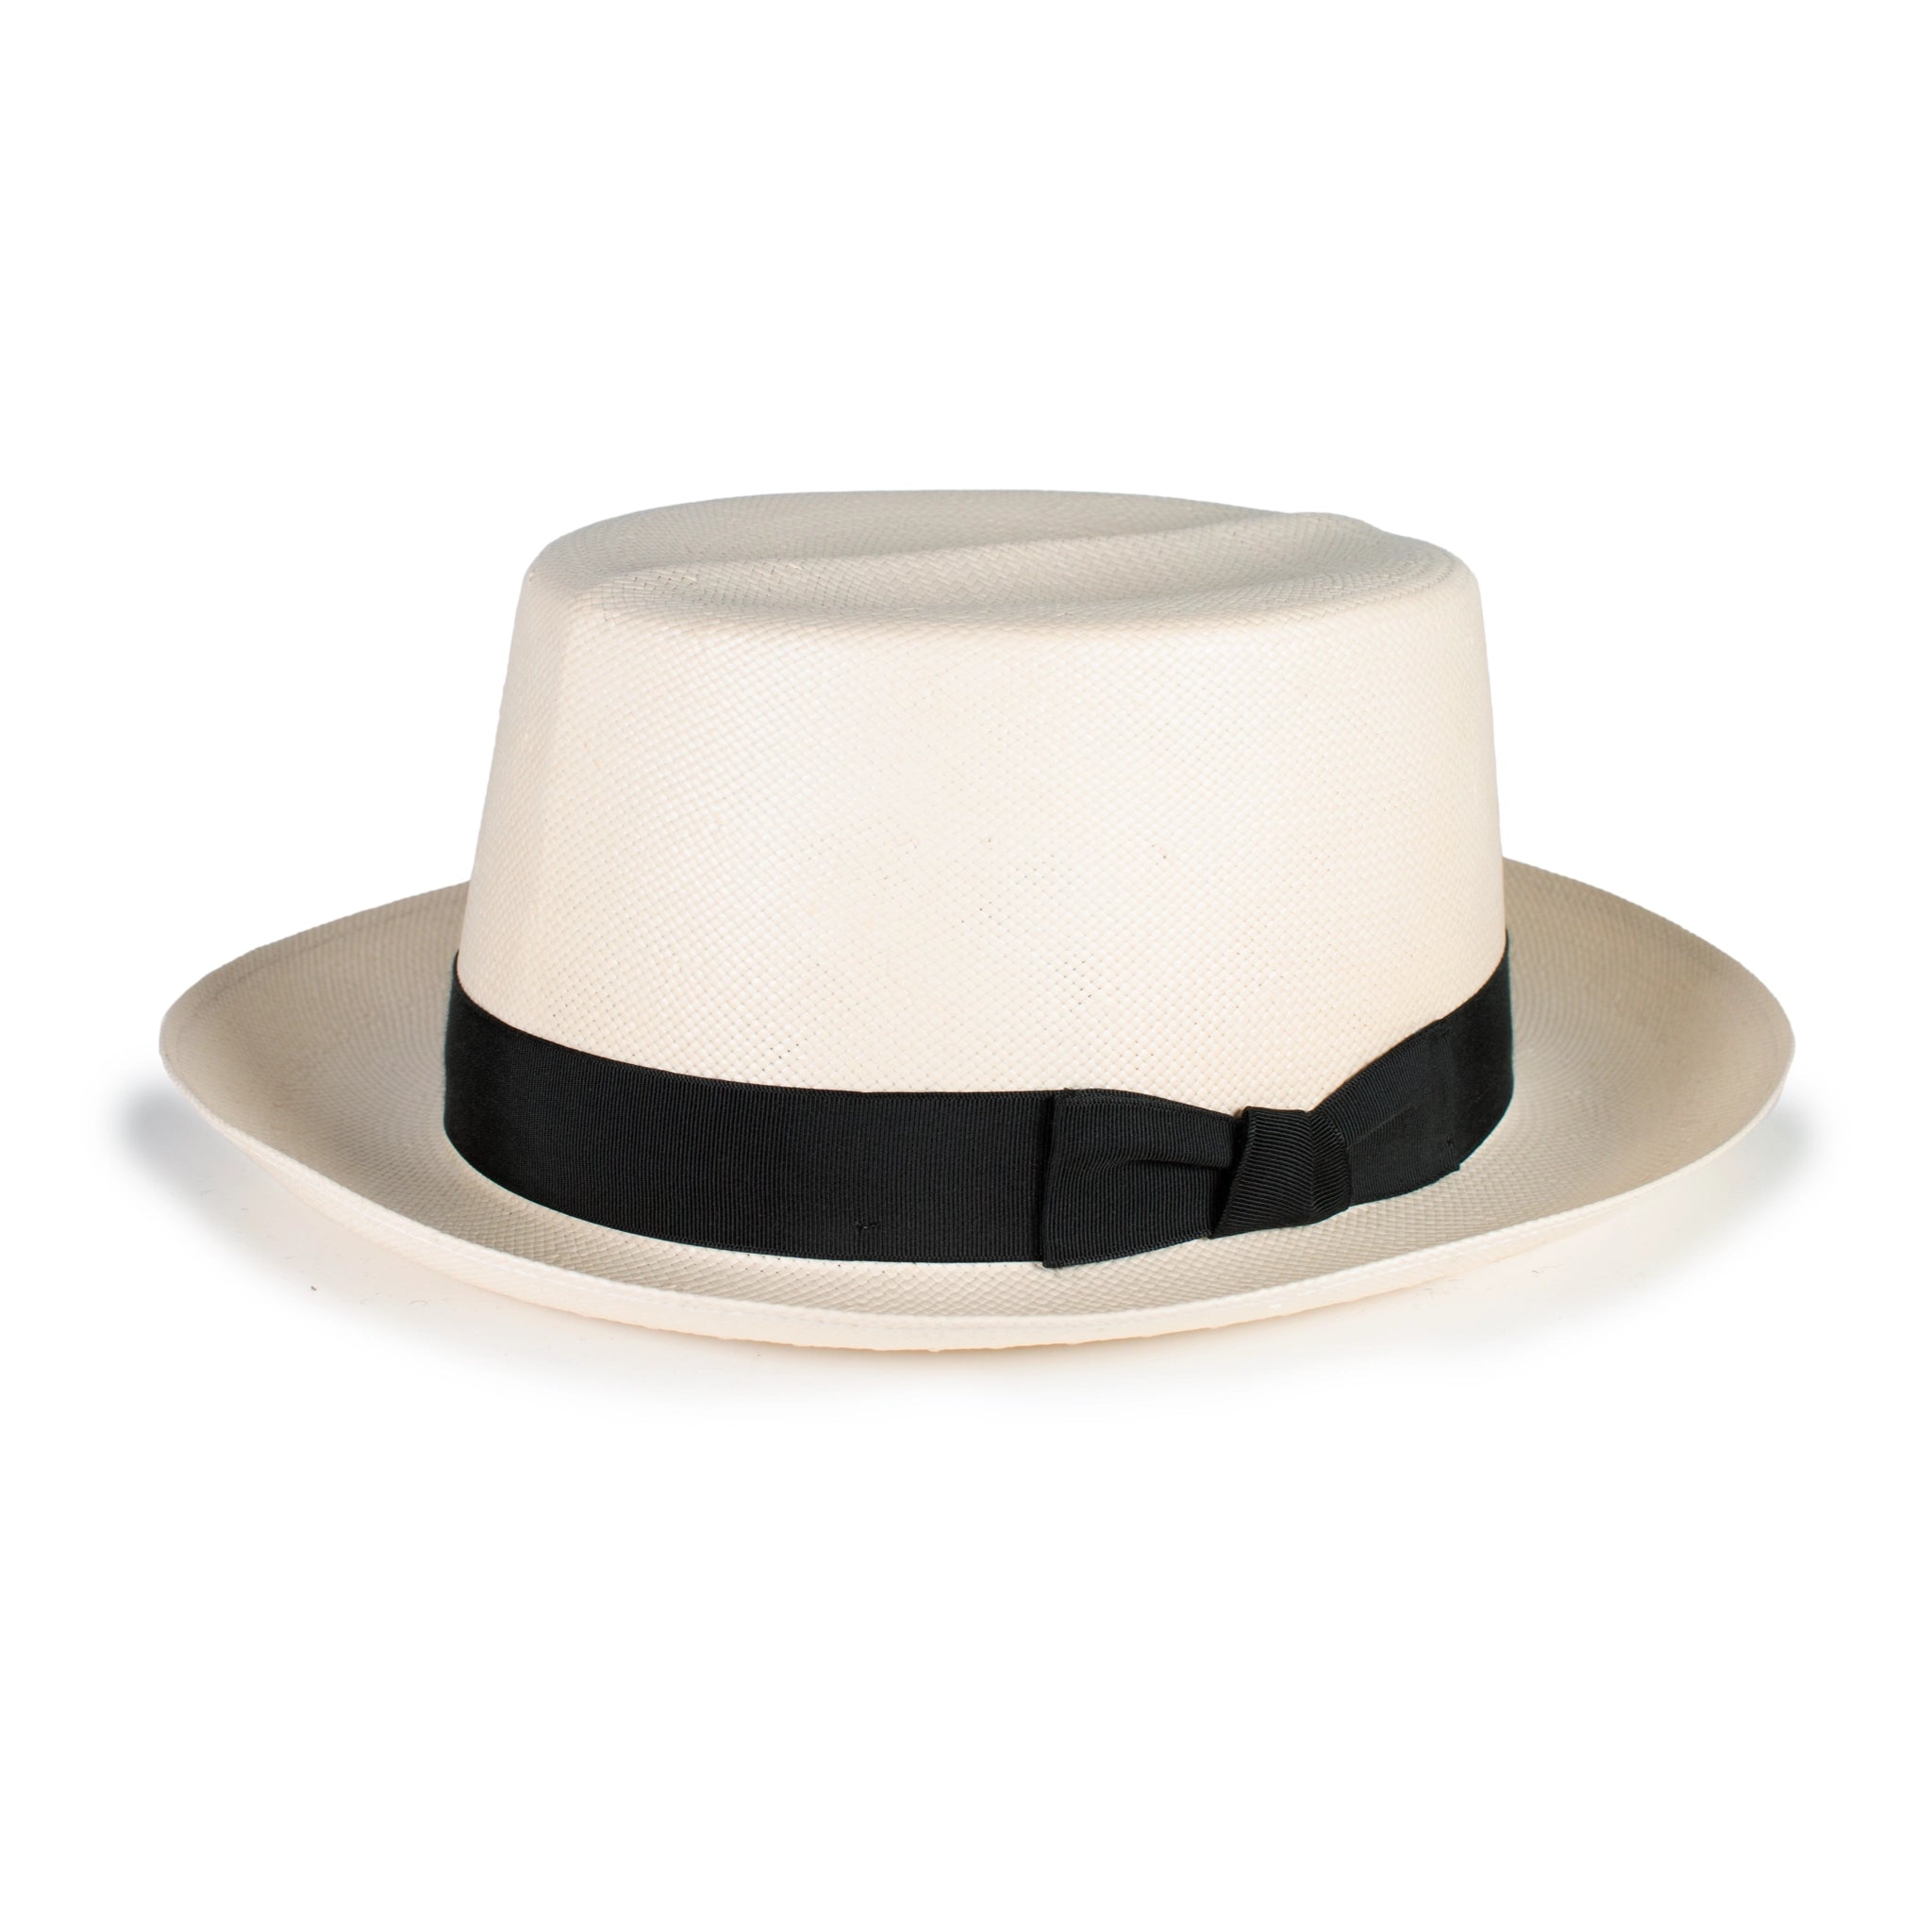 Optimo Straw Hat by Dobbs - Bencraft Hatters